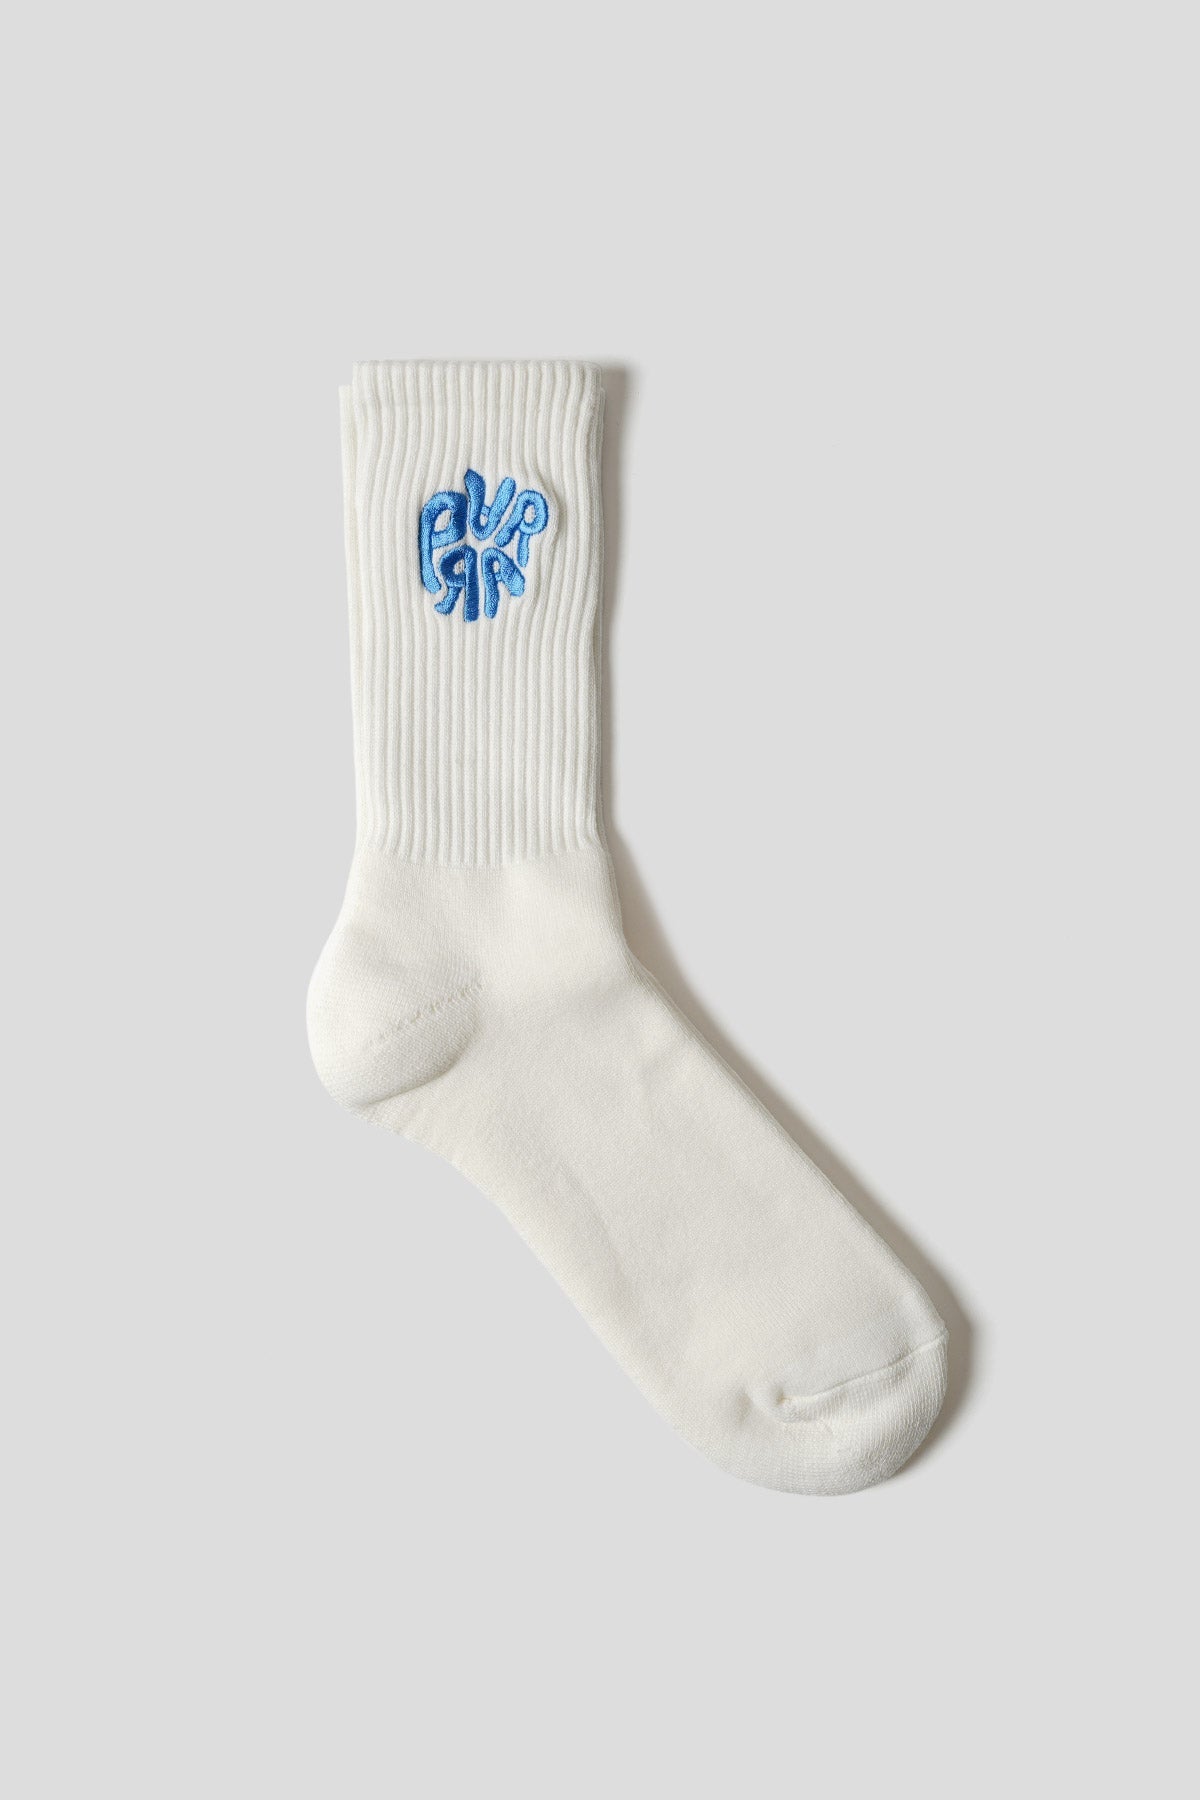 BY PARRA - WHITE AND BLUE LOGO CREW 1976 SOCKS – LE LABO STORE